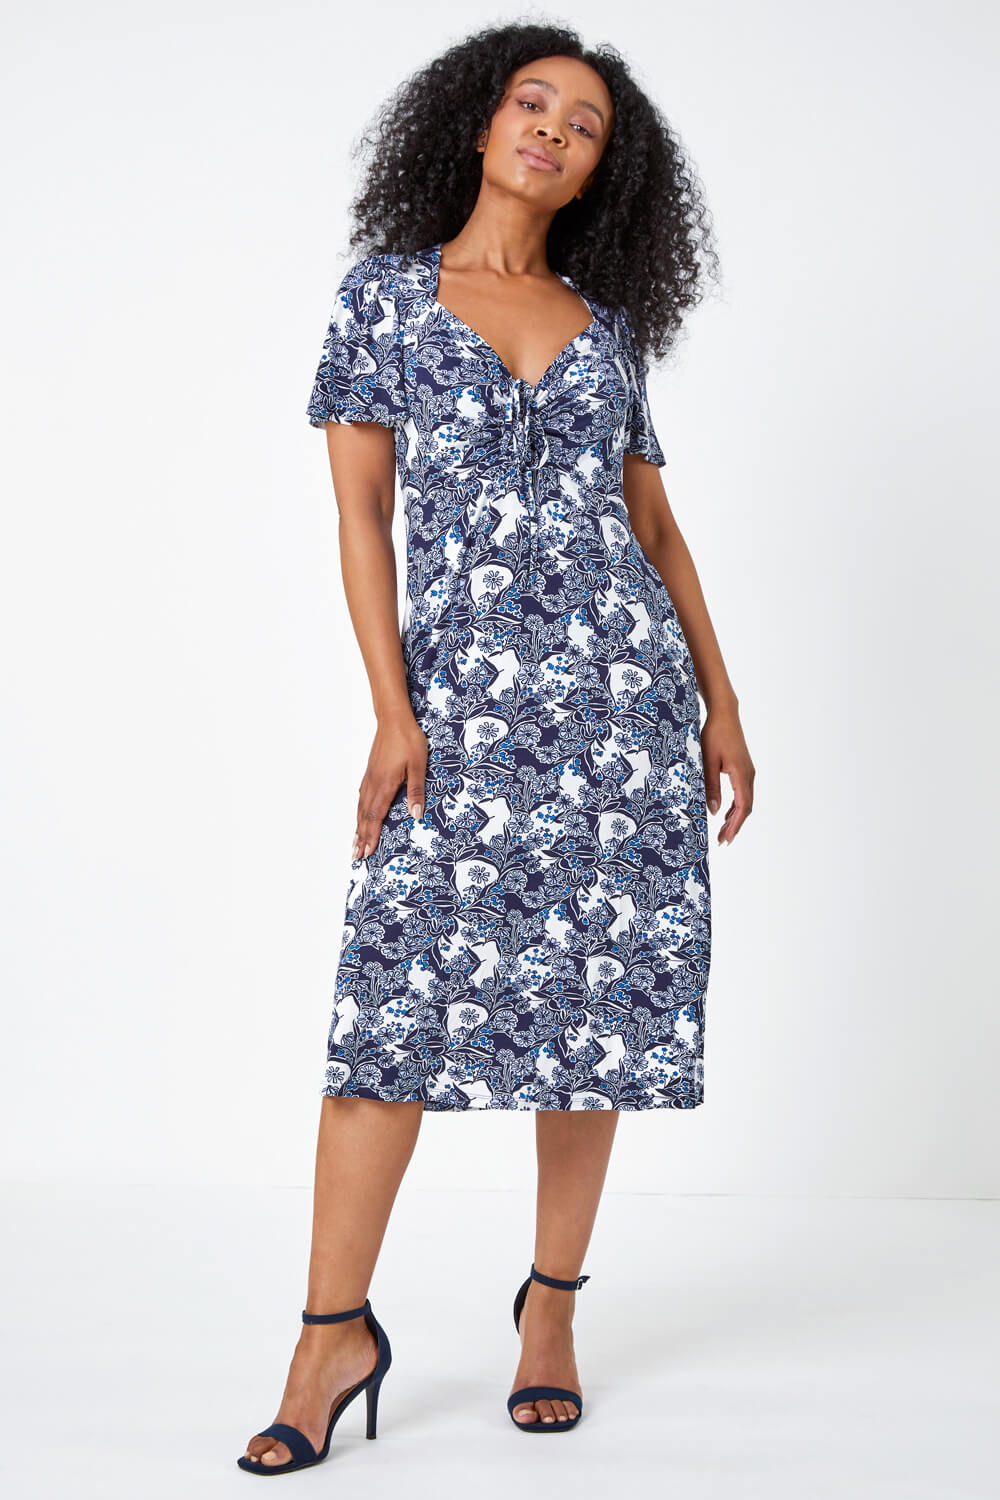 Blue Petite Floral Ruched Stretch Tea Dress, Image 2 of 5